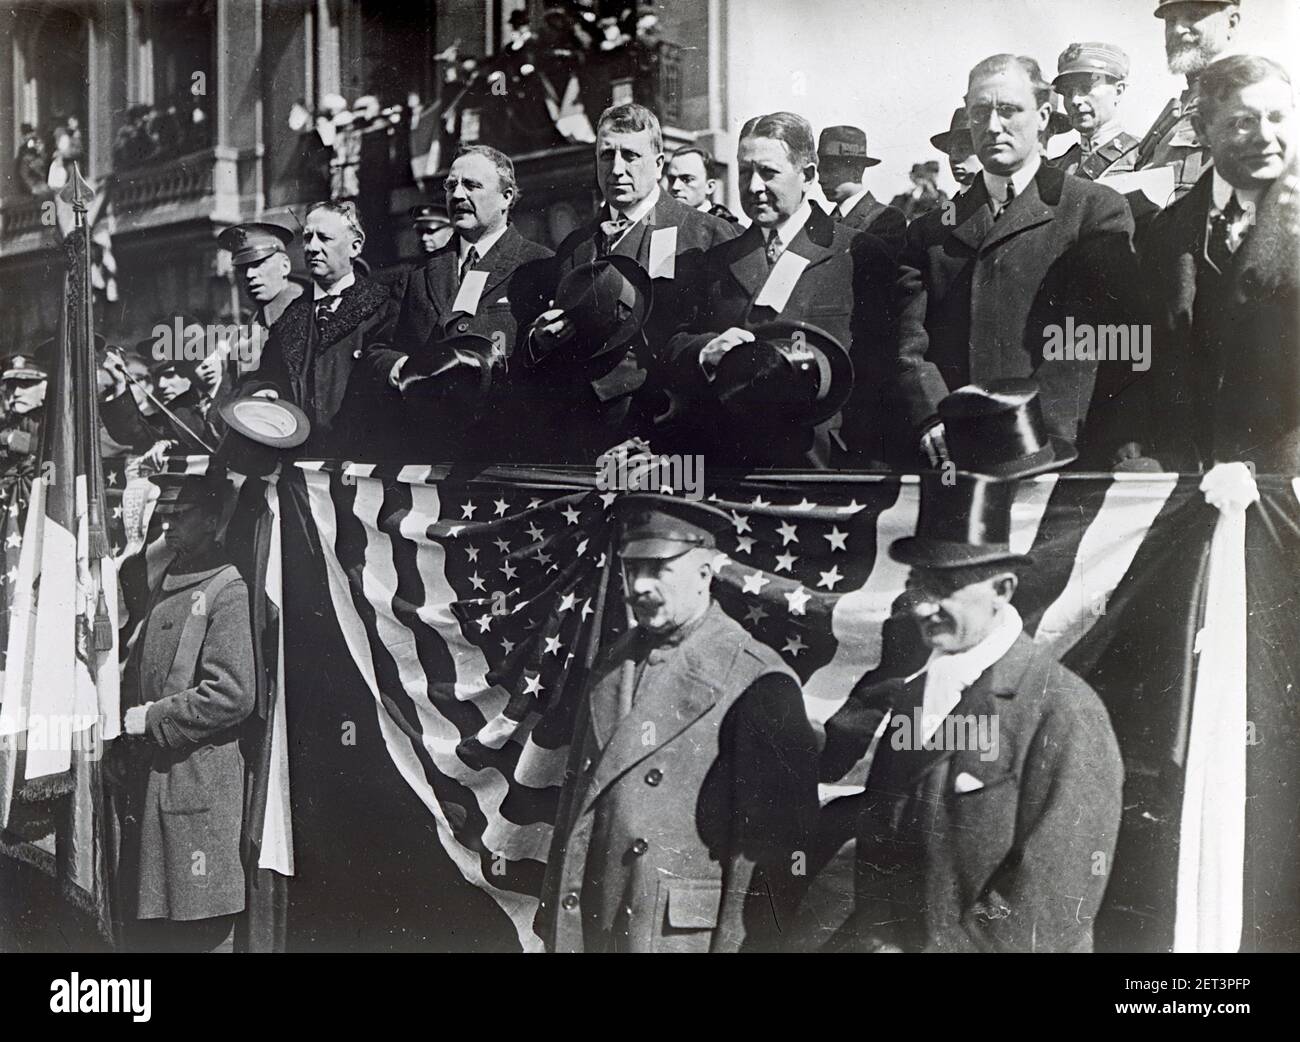 Antique 1914 photograph shows Assistant Secretary of Navy Franklin Delano Roosevelt (middle row, second from right) on June 30, 1914 at a patriotic event. SOURCE: GLASS SLIDE Stock Photo